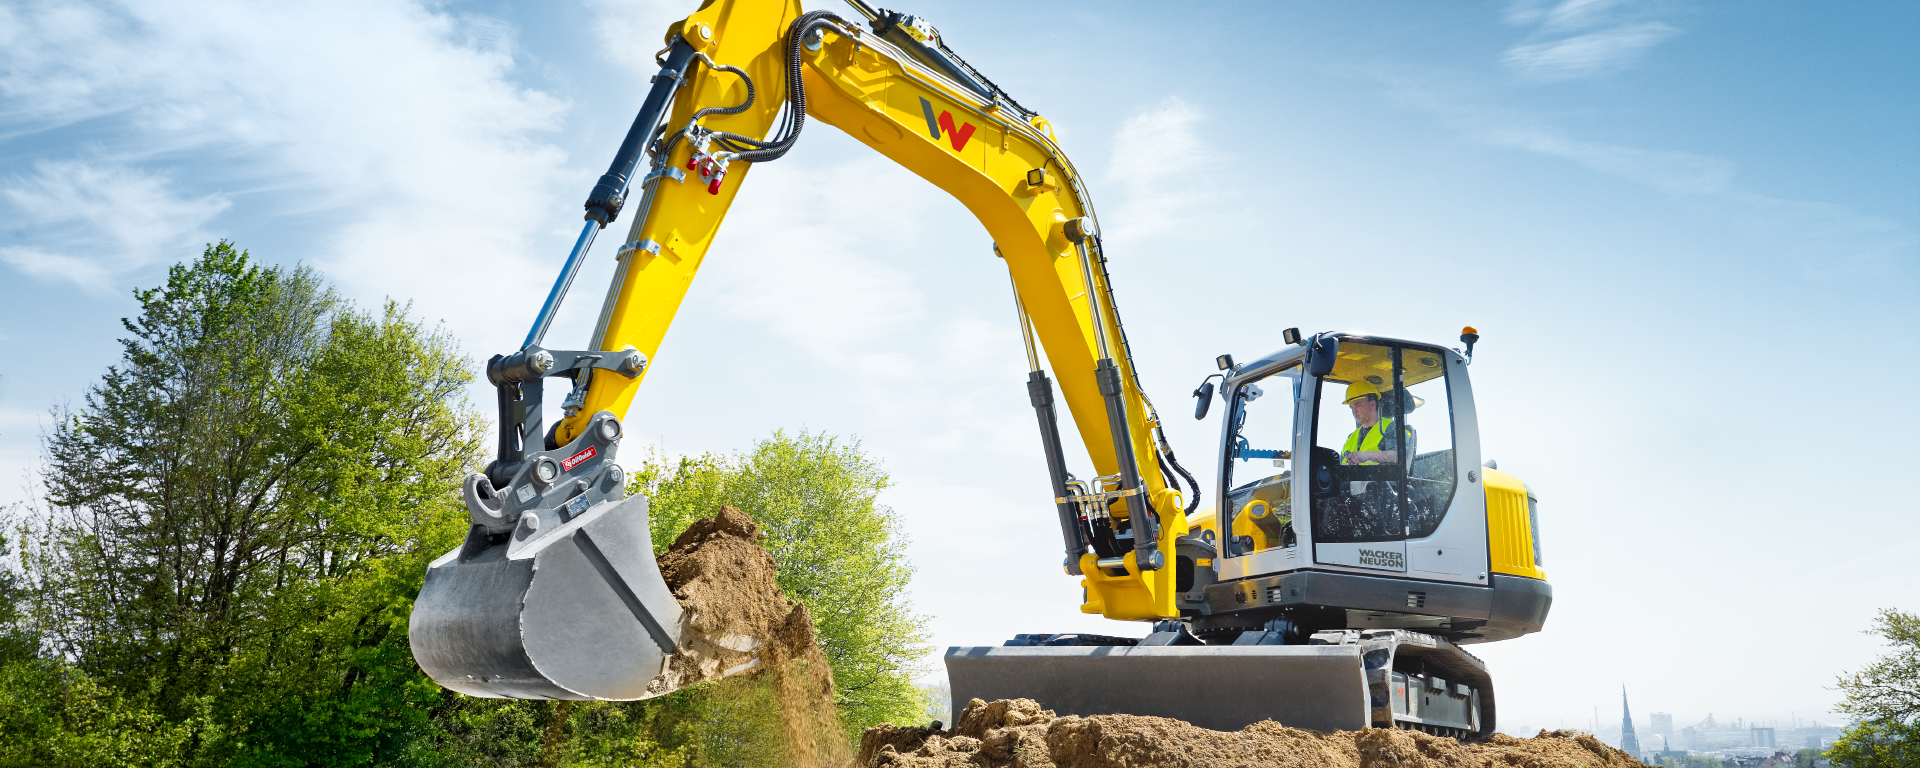 Excavator work with the ET145 in action